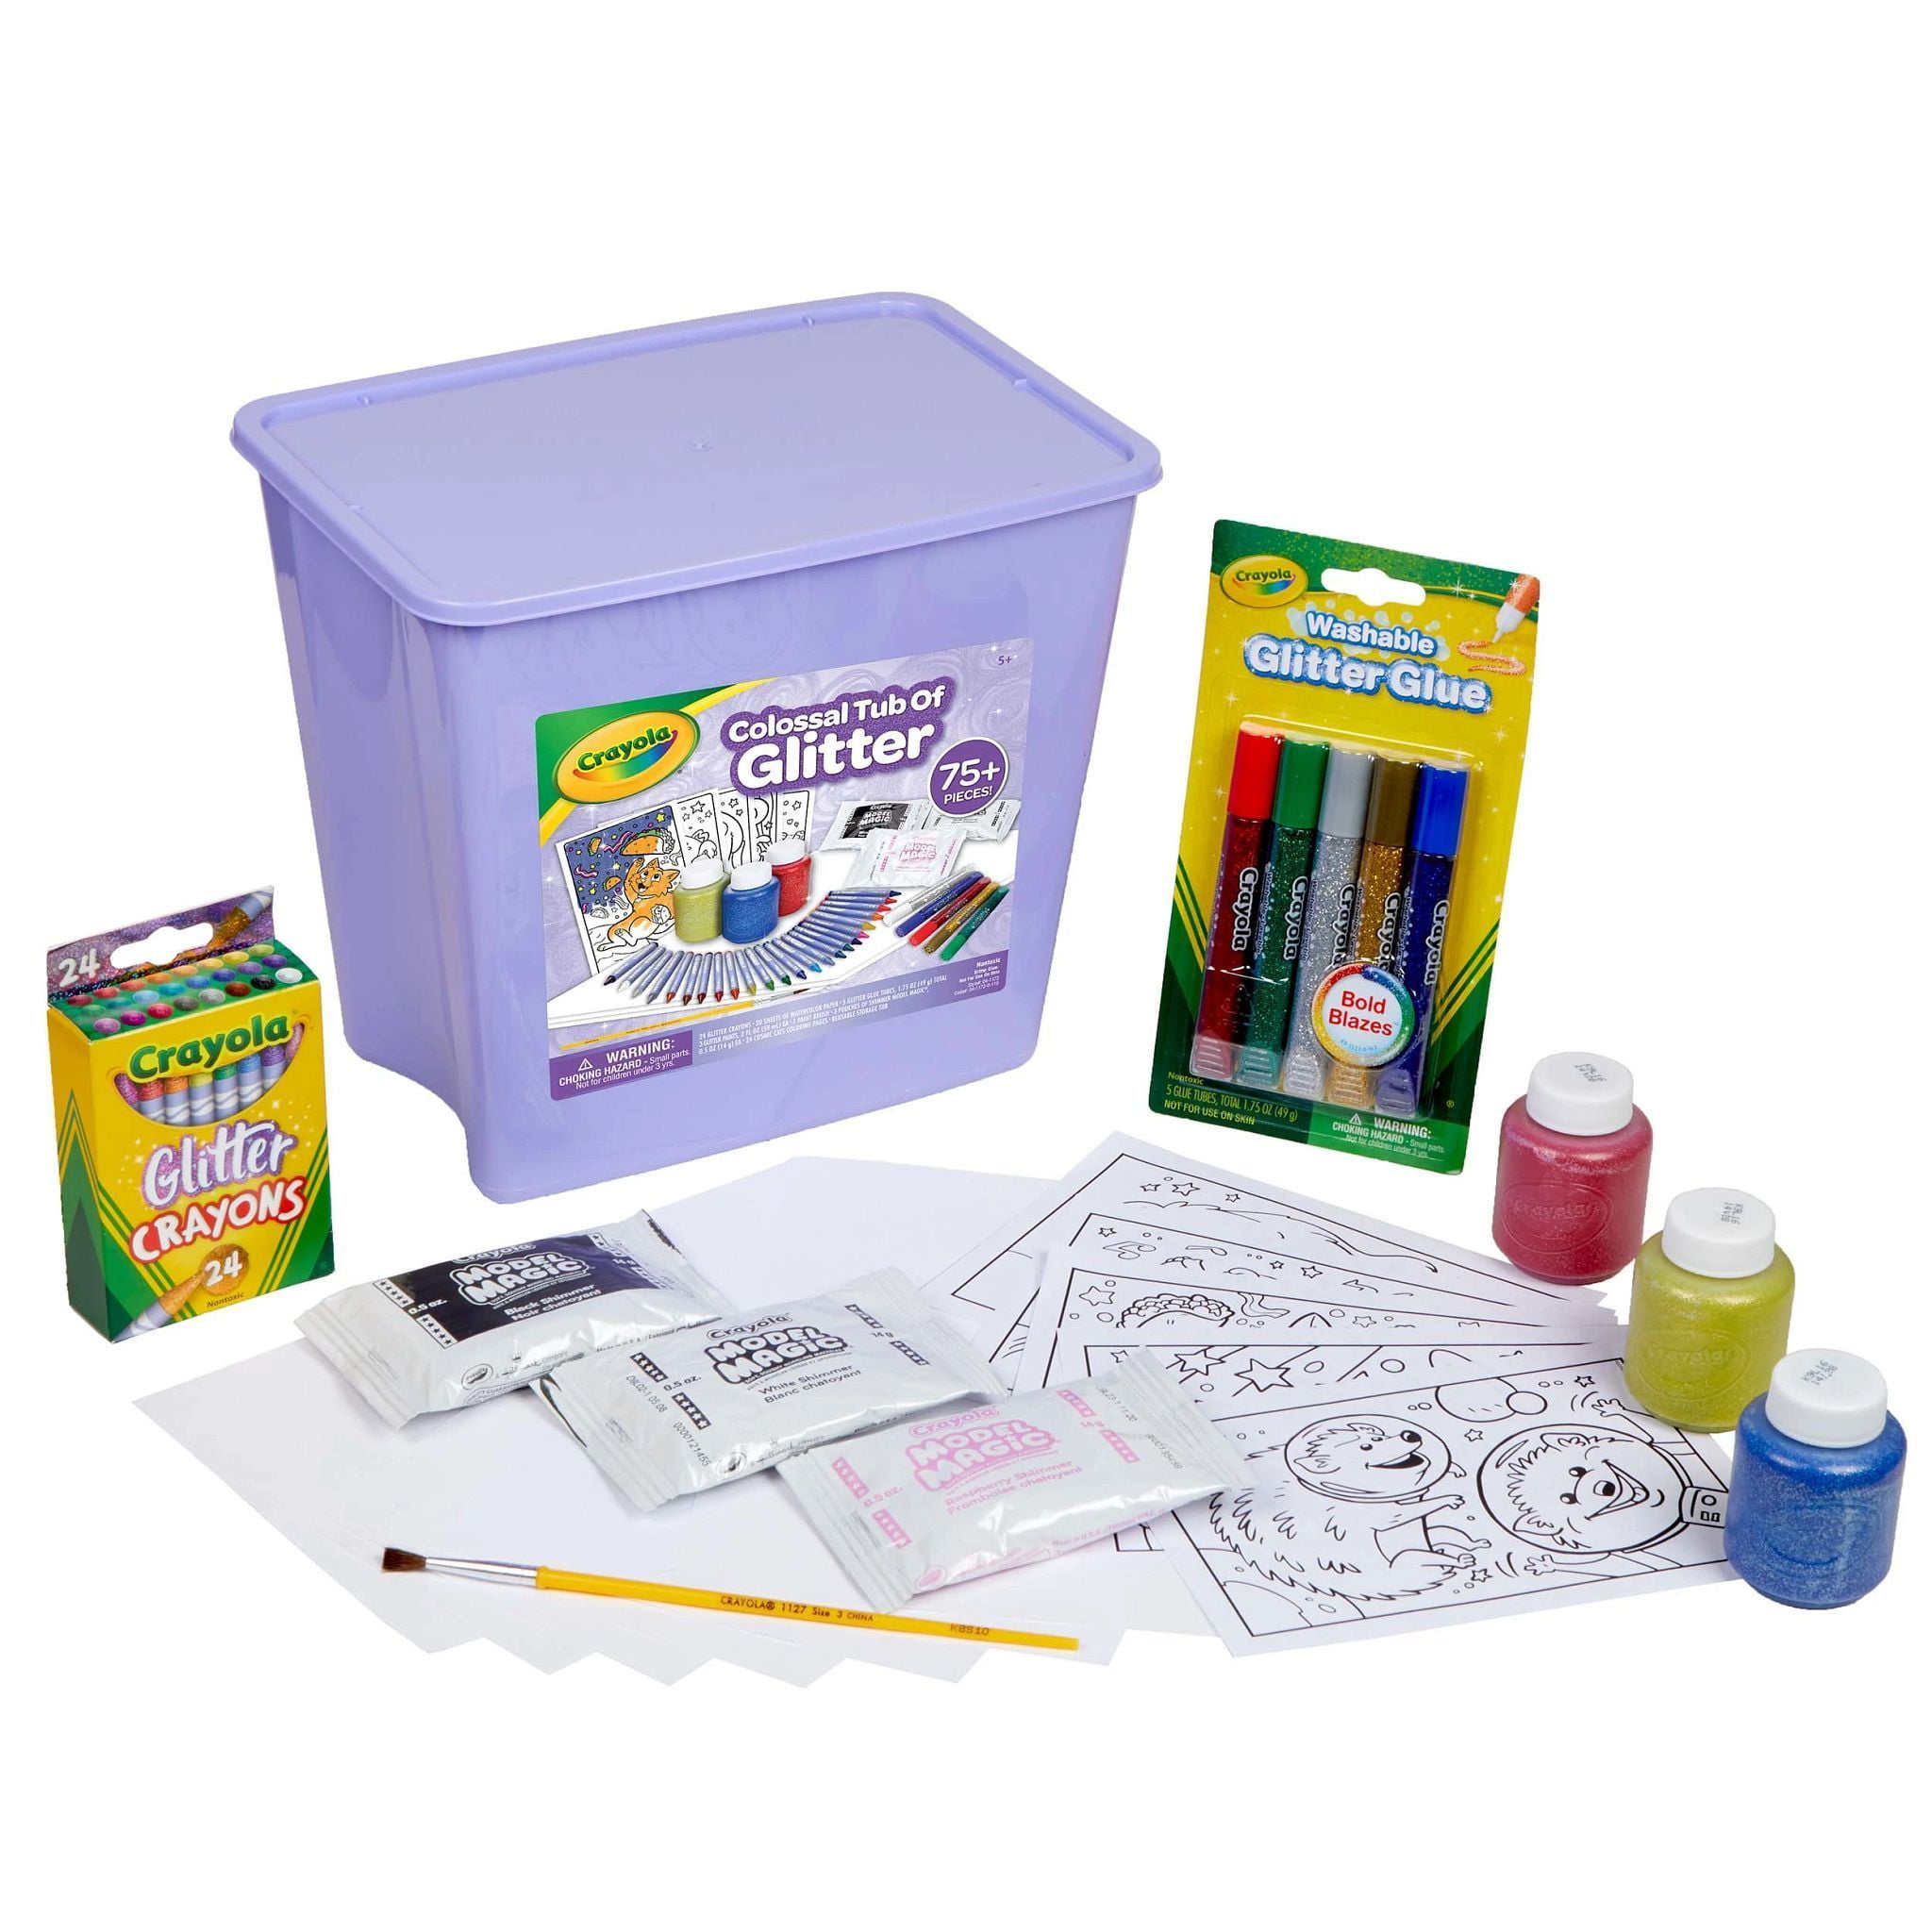 Crayola Glitter Arts and Crafts Kit, 80+ School Supplies, Tub of Glitter Toy, Gifts for Girls & Boys, Child, Size: One Size